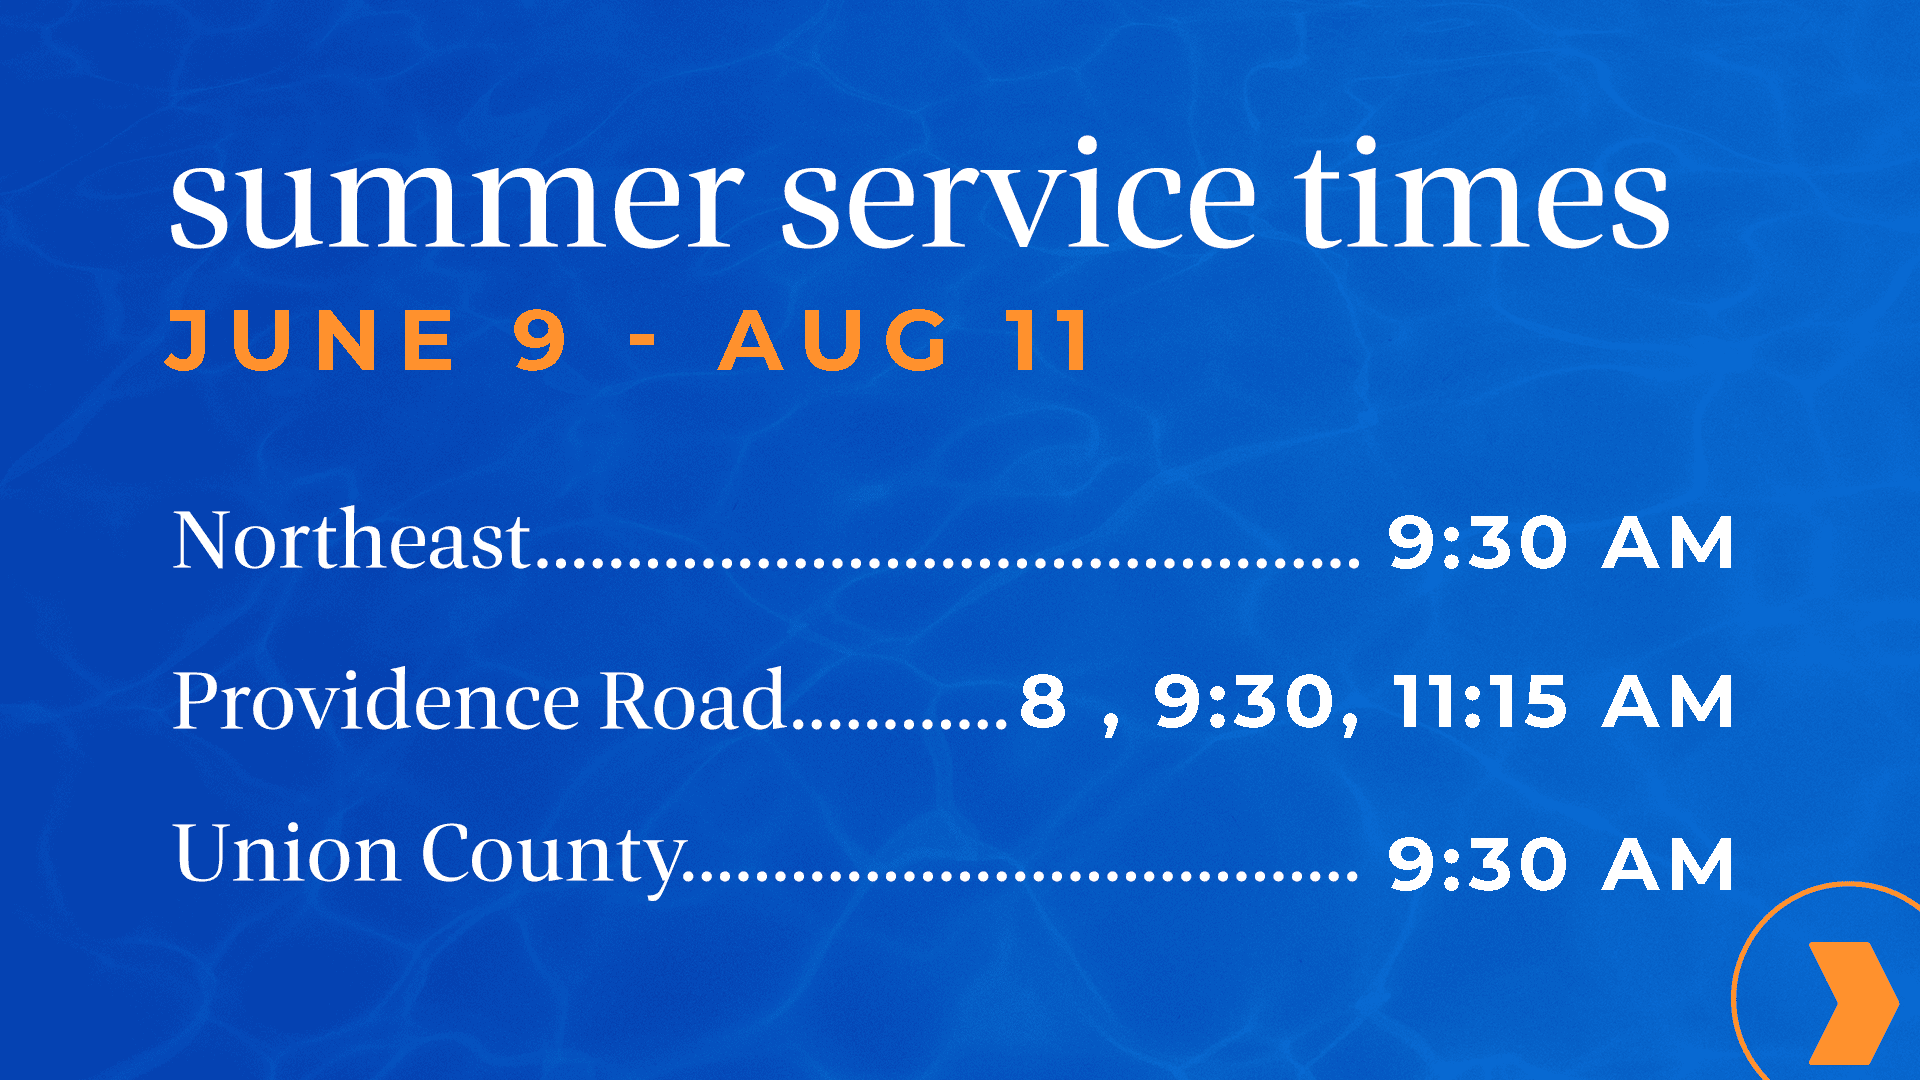 Summer Service Times at Northeast and Union County Campuses